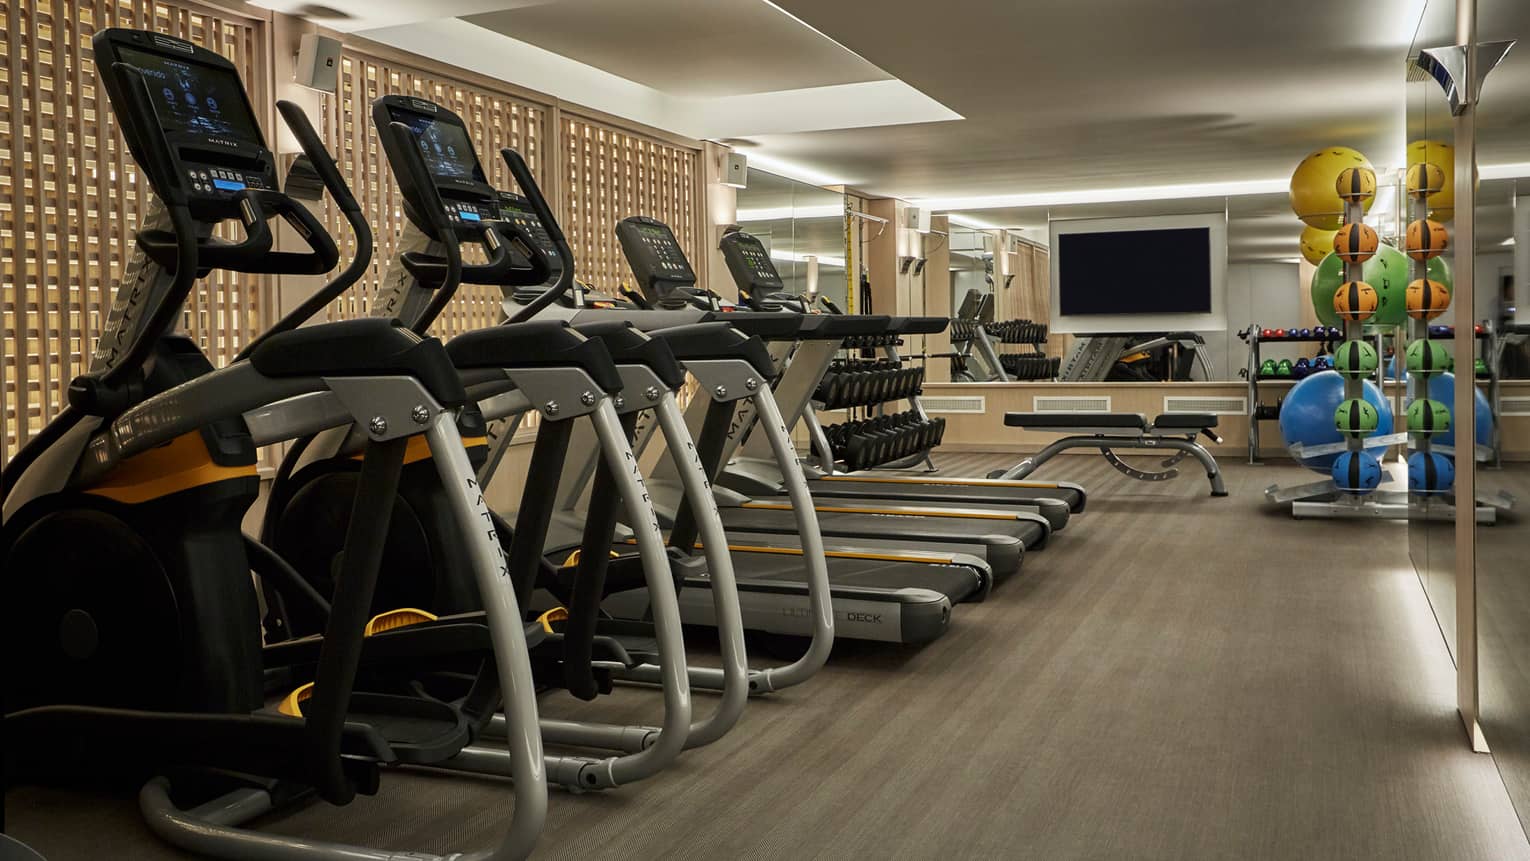 Row of cardio machines in fitness room with wood floor, colourful pilates balls on rack in background